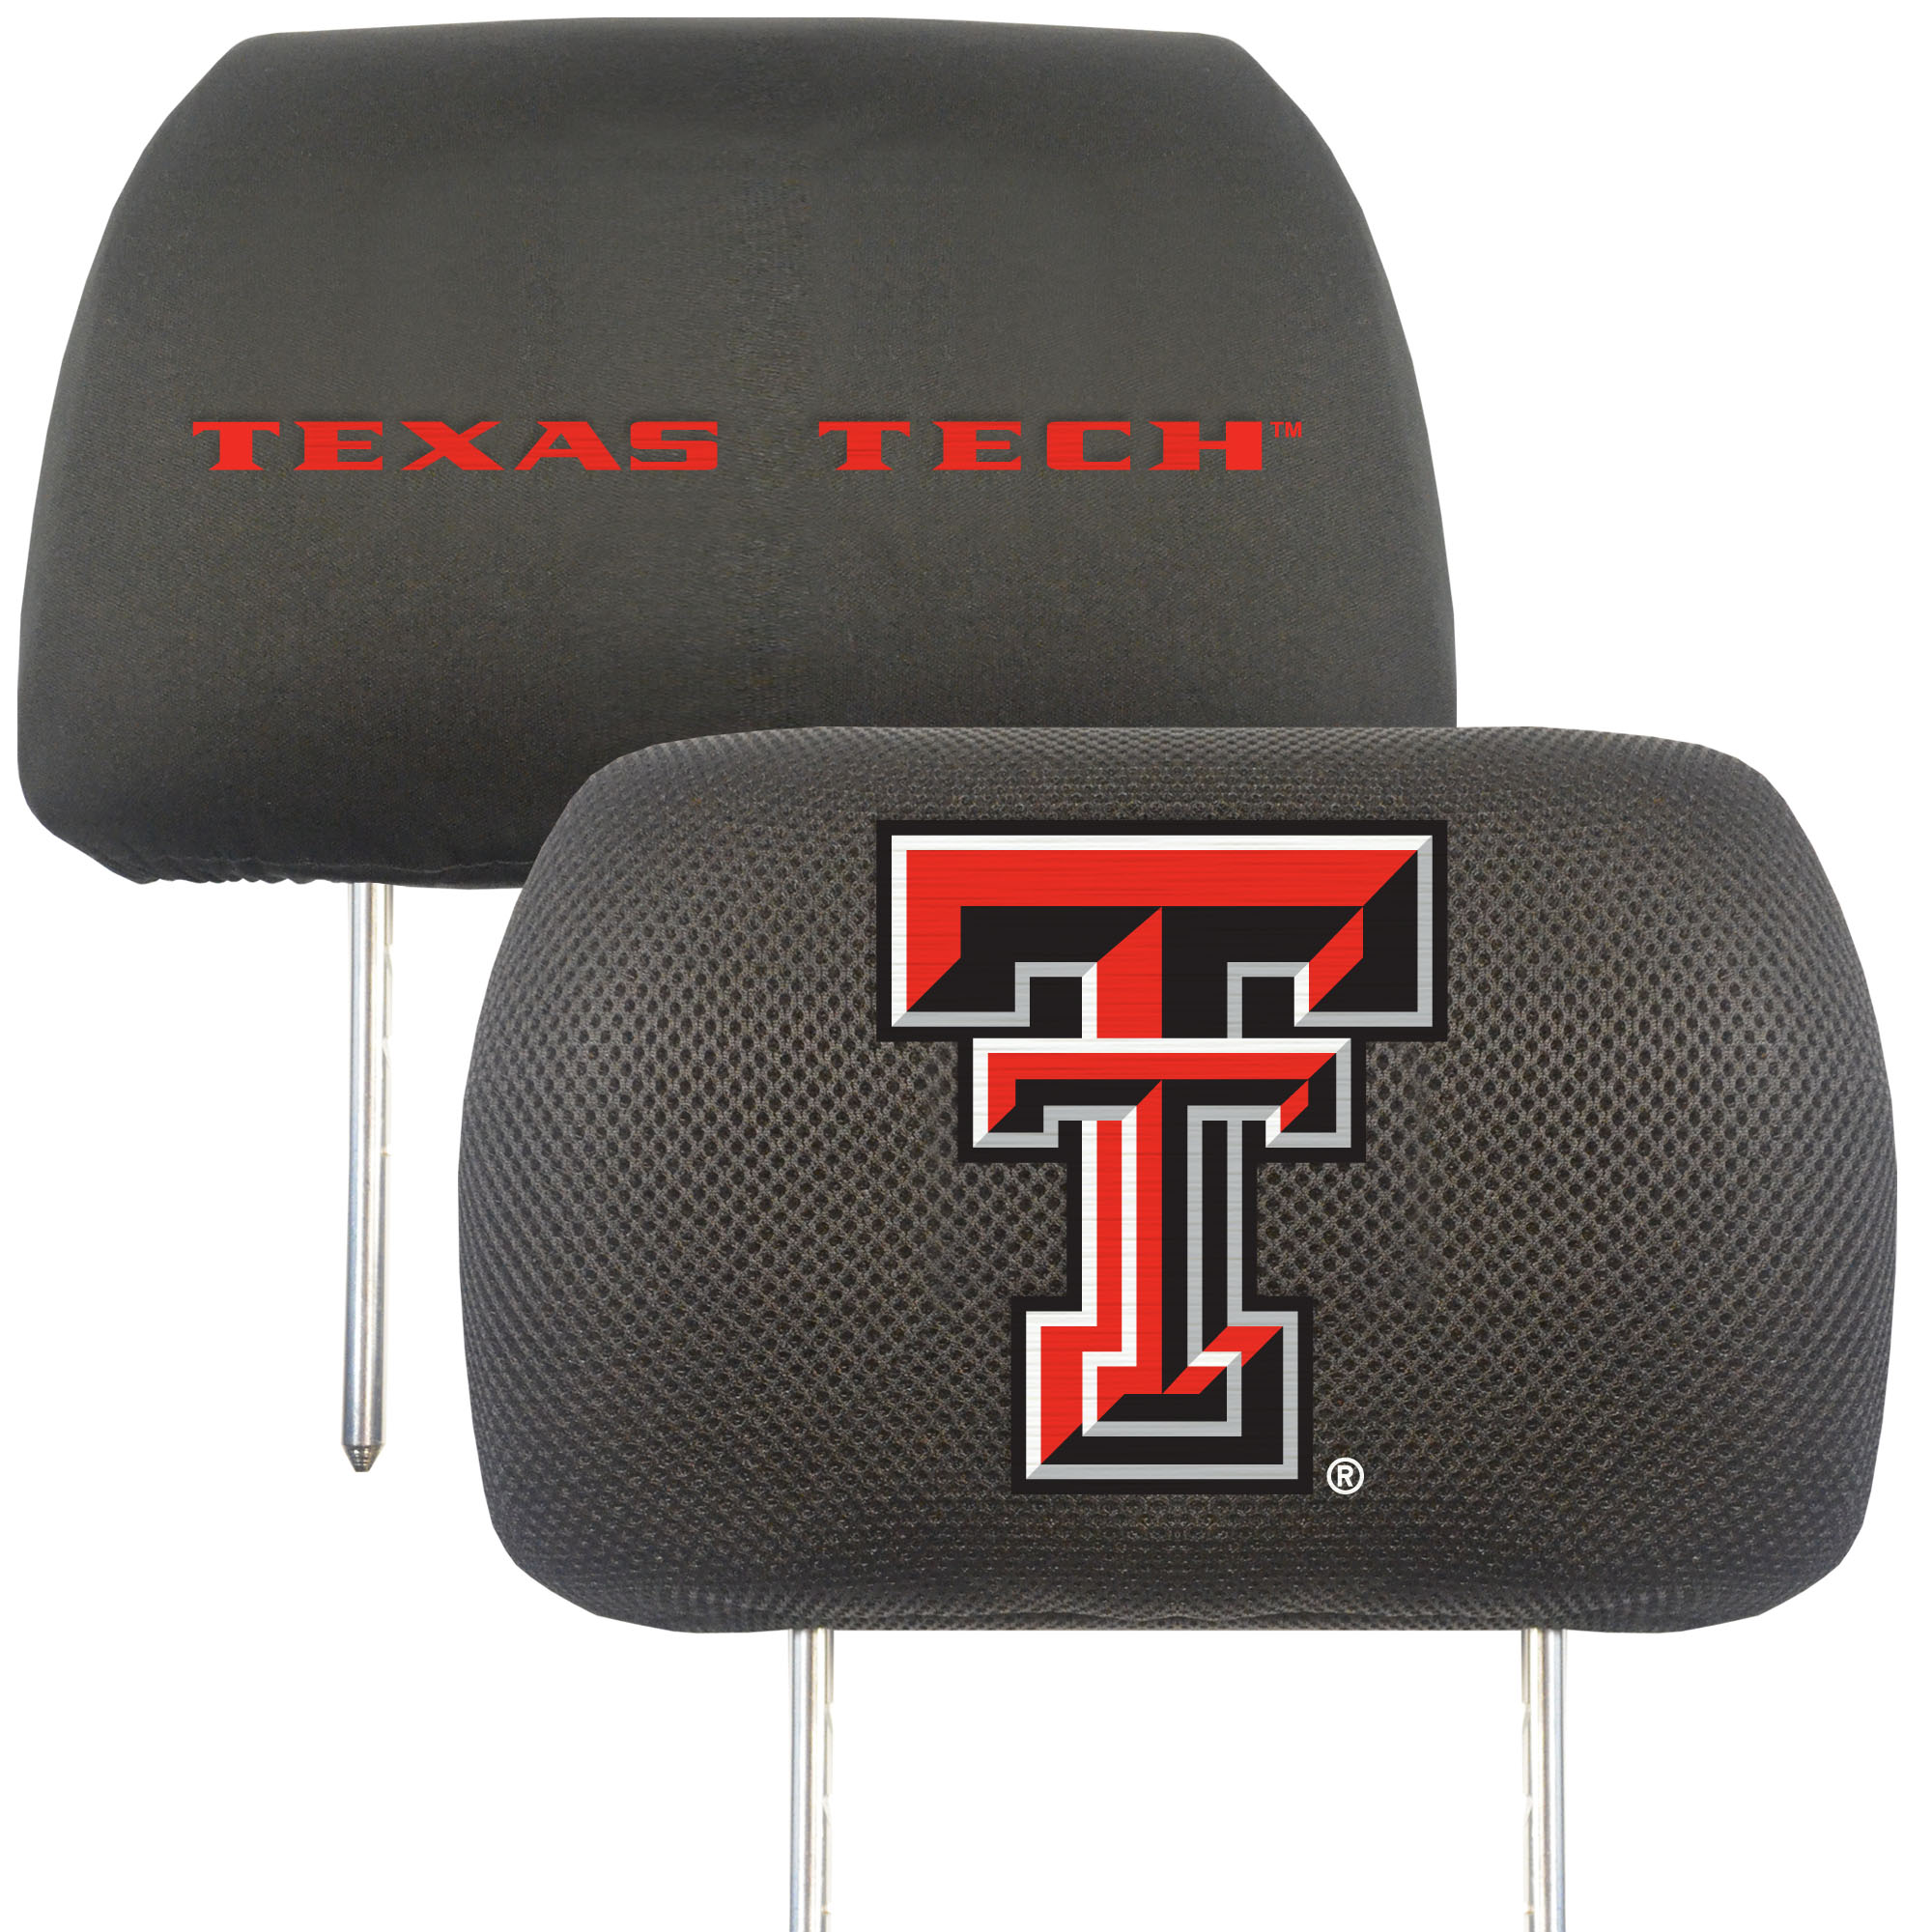 Texas Tech Red Raiders Headrest Covers FanMats Special Order